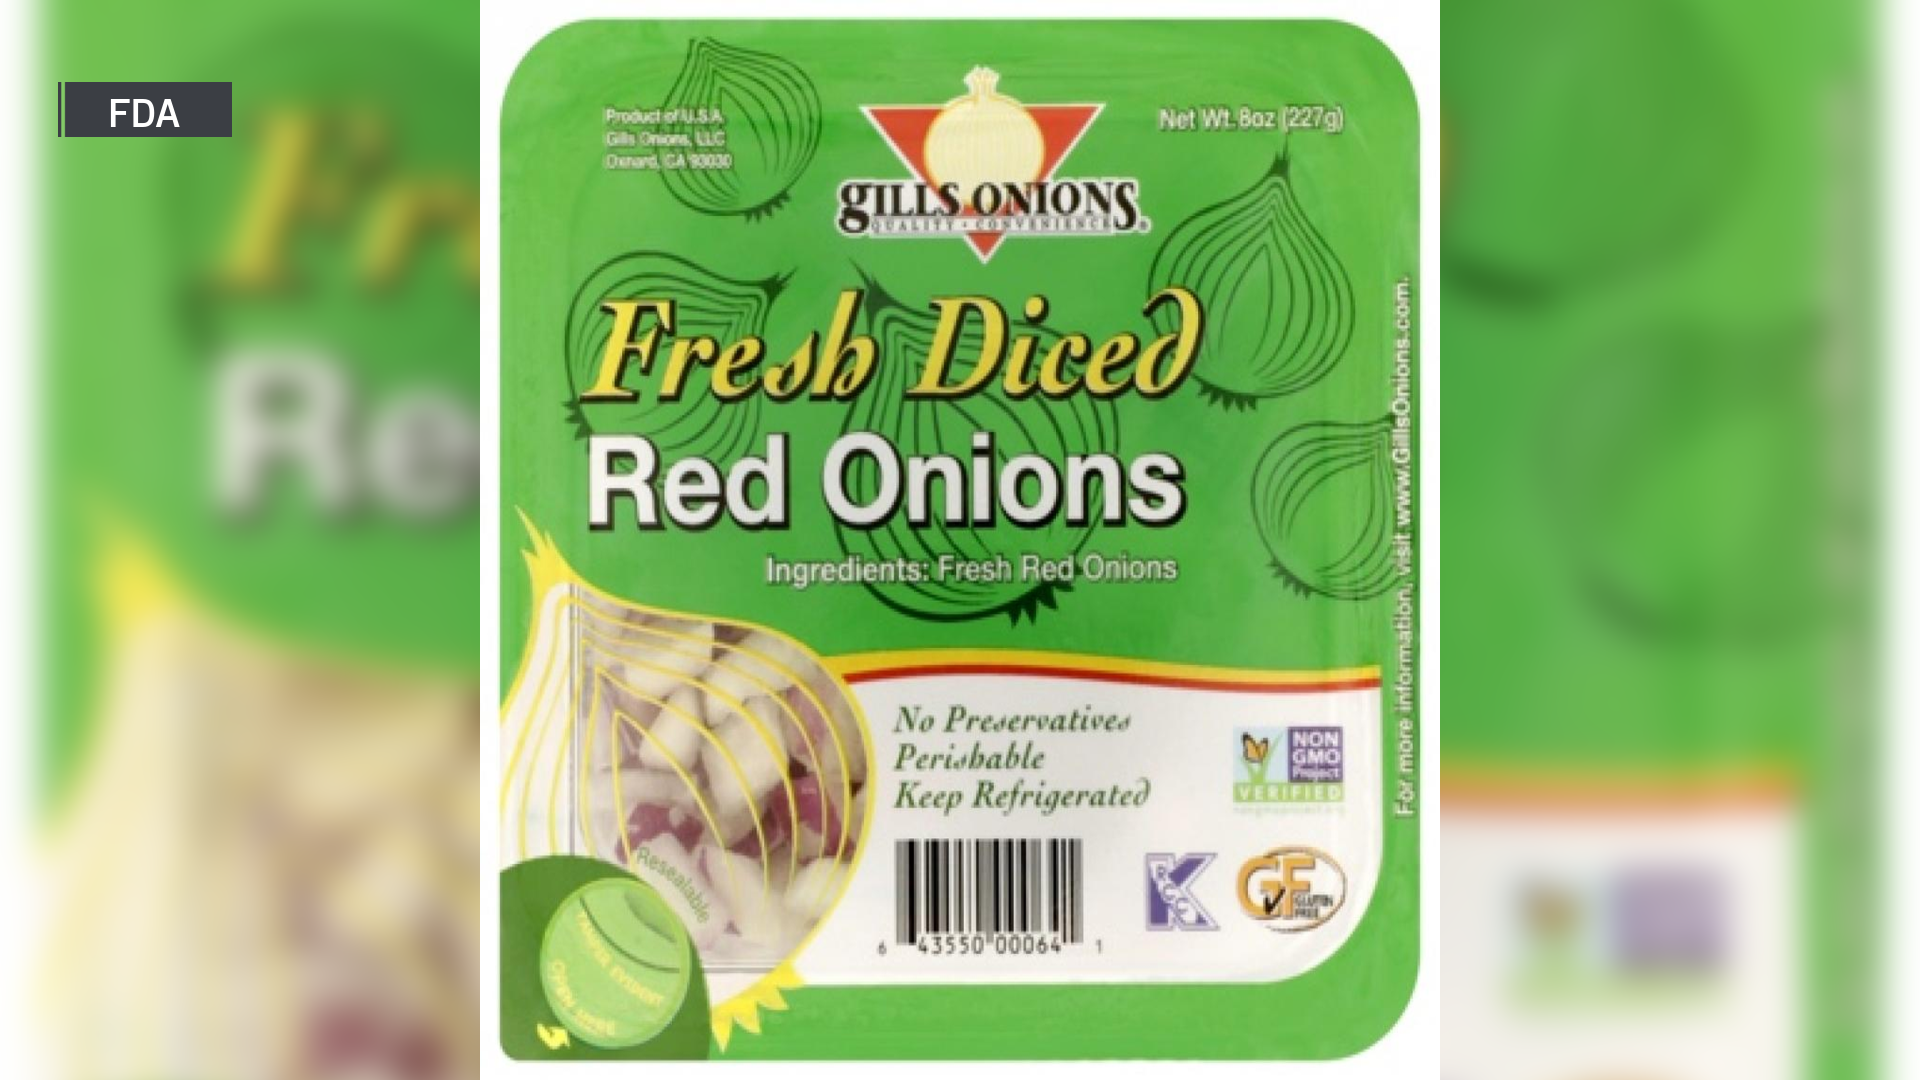 Bagged, precut onions linked to salmonella outbreak that has sickened 73 people in 22 states